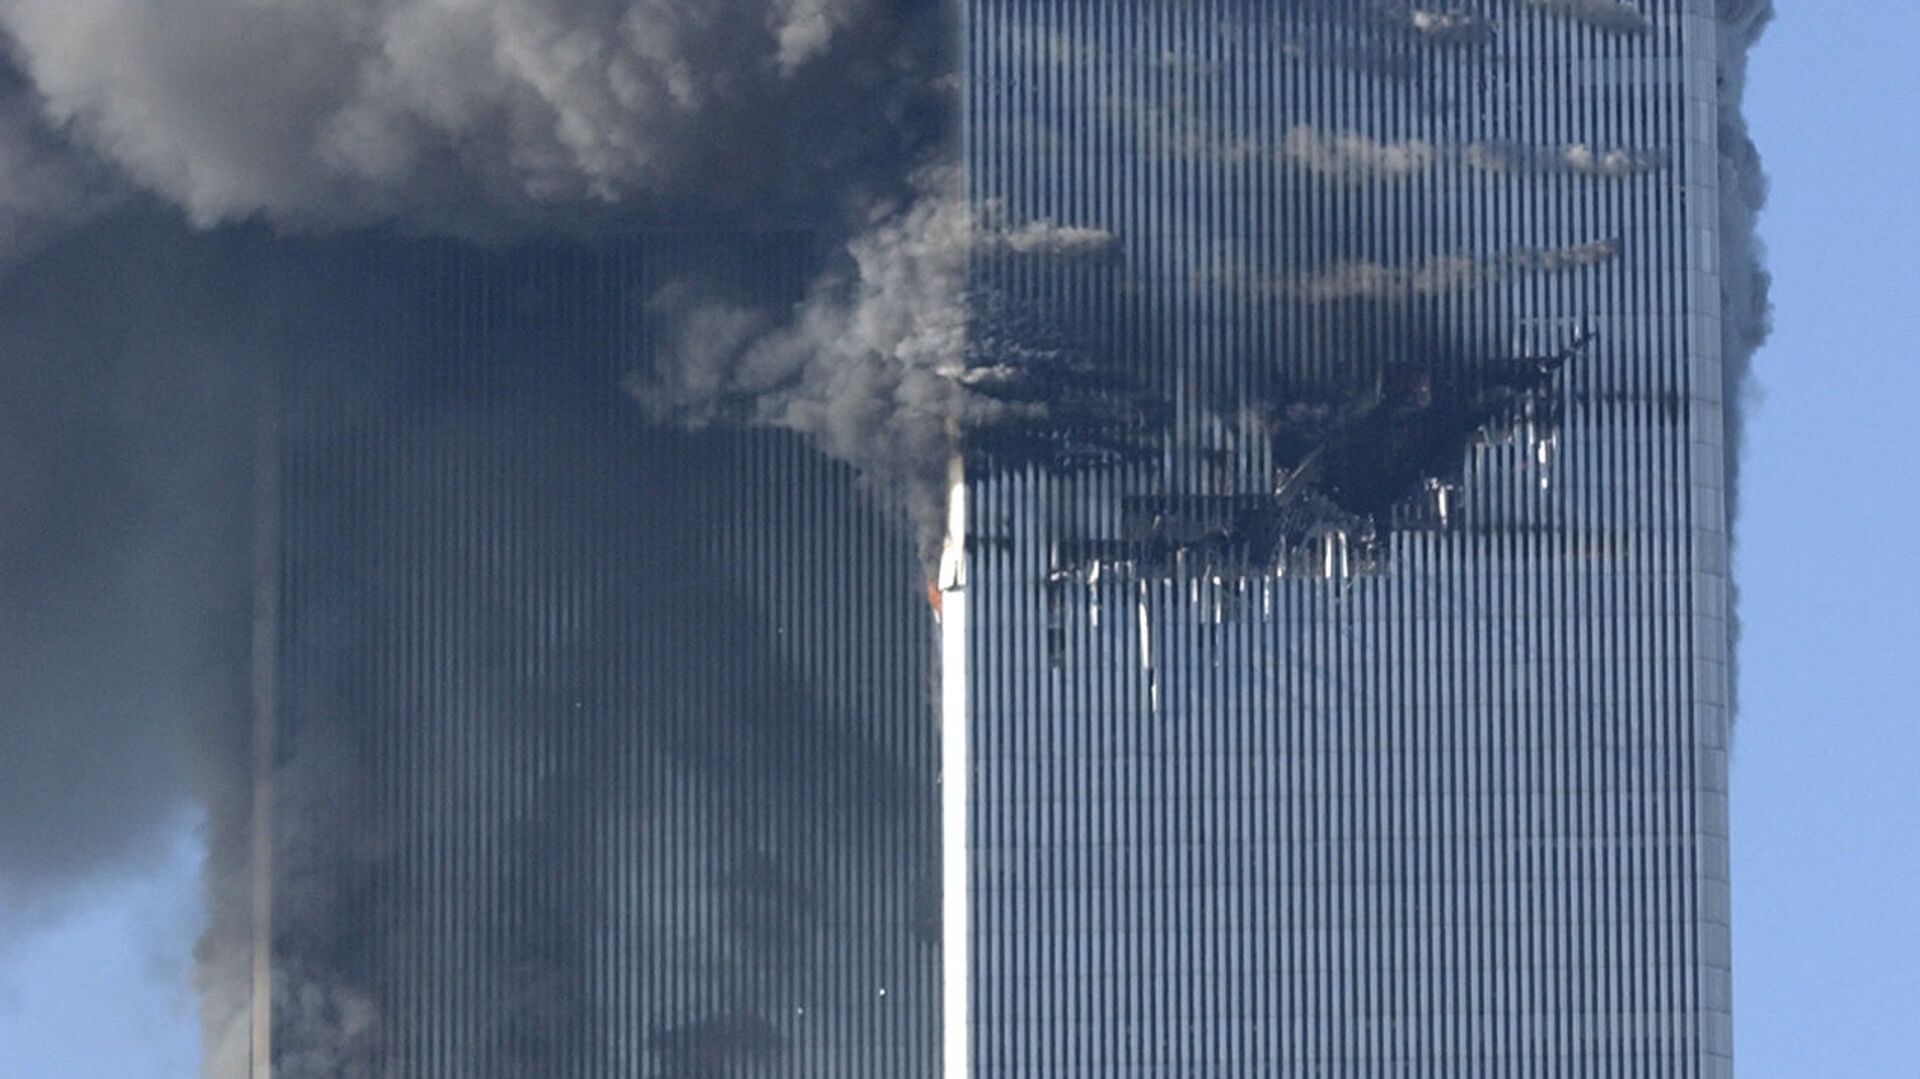 Smoke billows from the North and South Towers of the World Trade Center before they collapsed on September 11, 2001 in New York, NY - Sputnik International, 1920, 11.09.2021